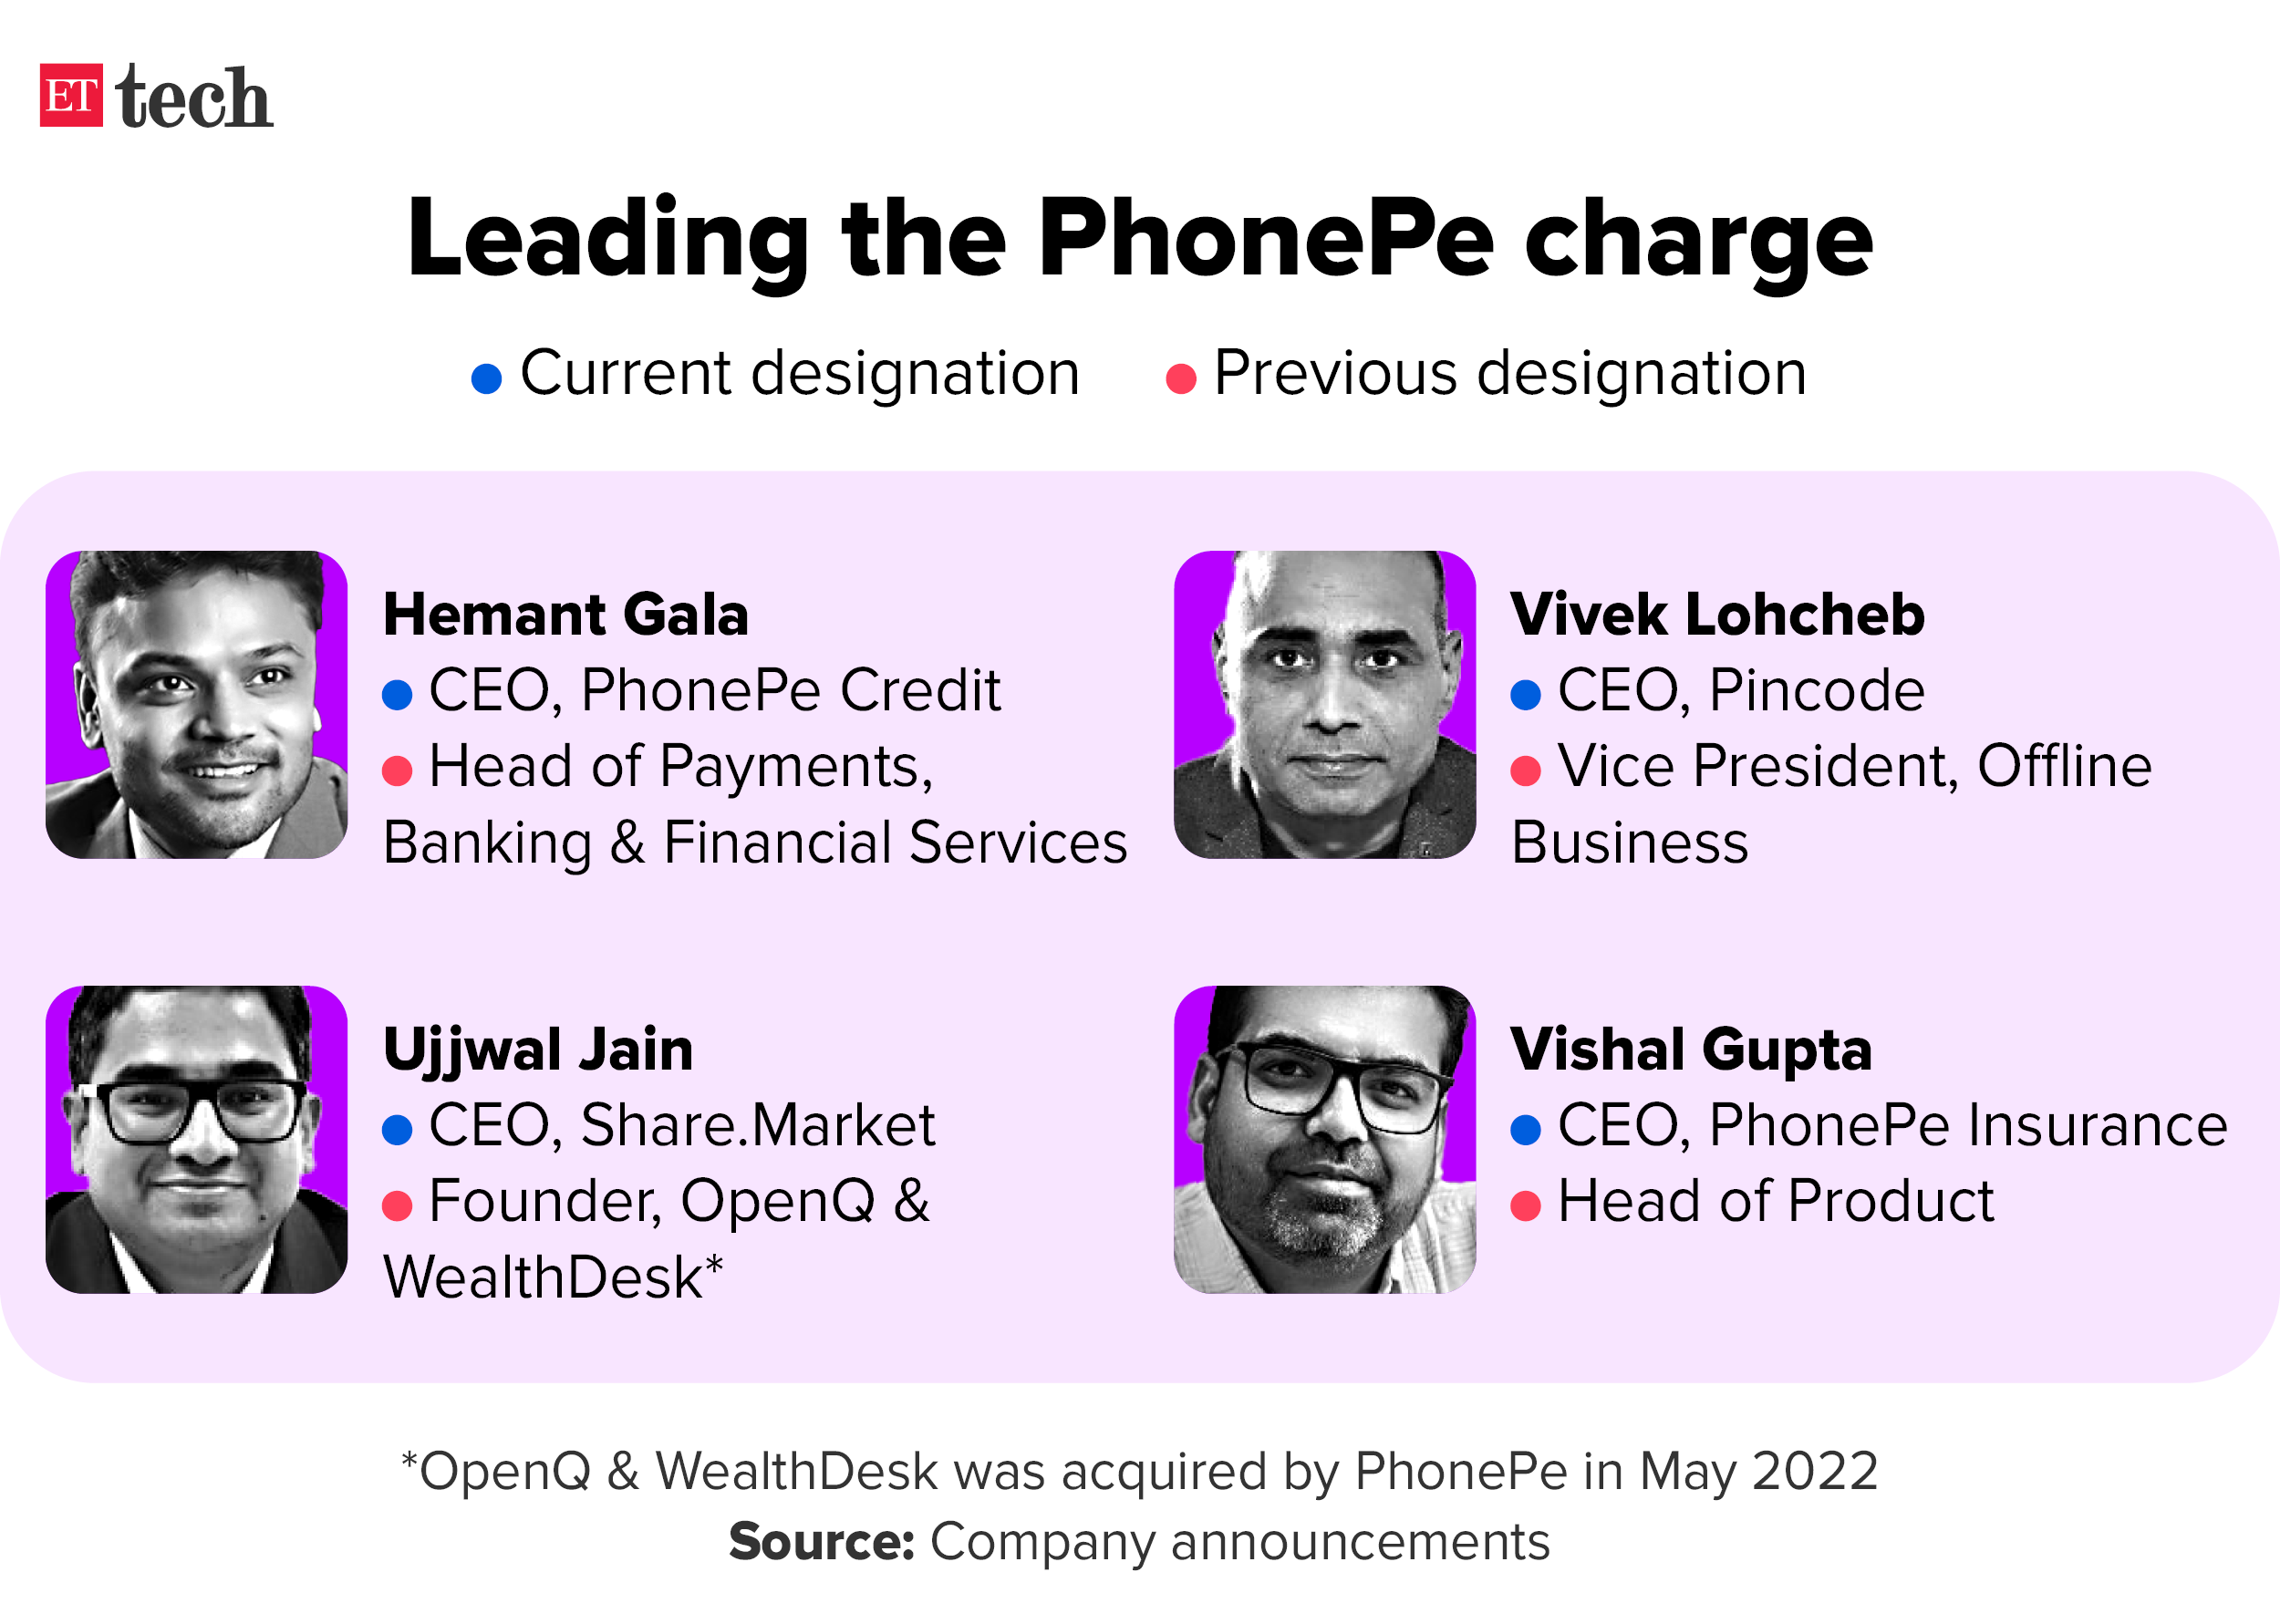 Leading the PhonePe charge_Graphic_ETTECH